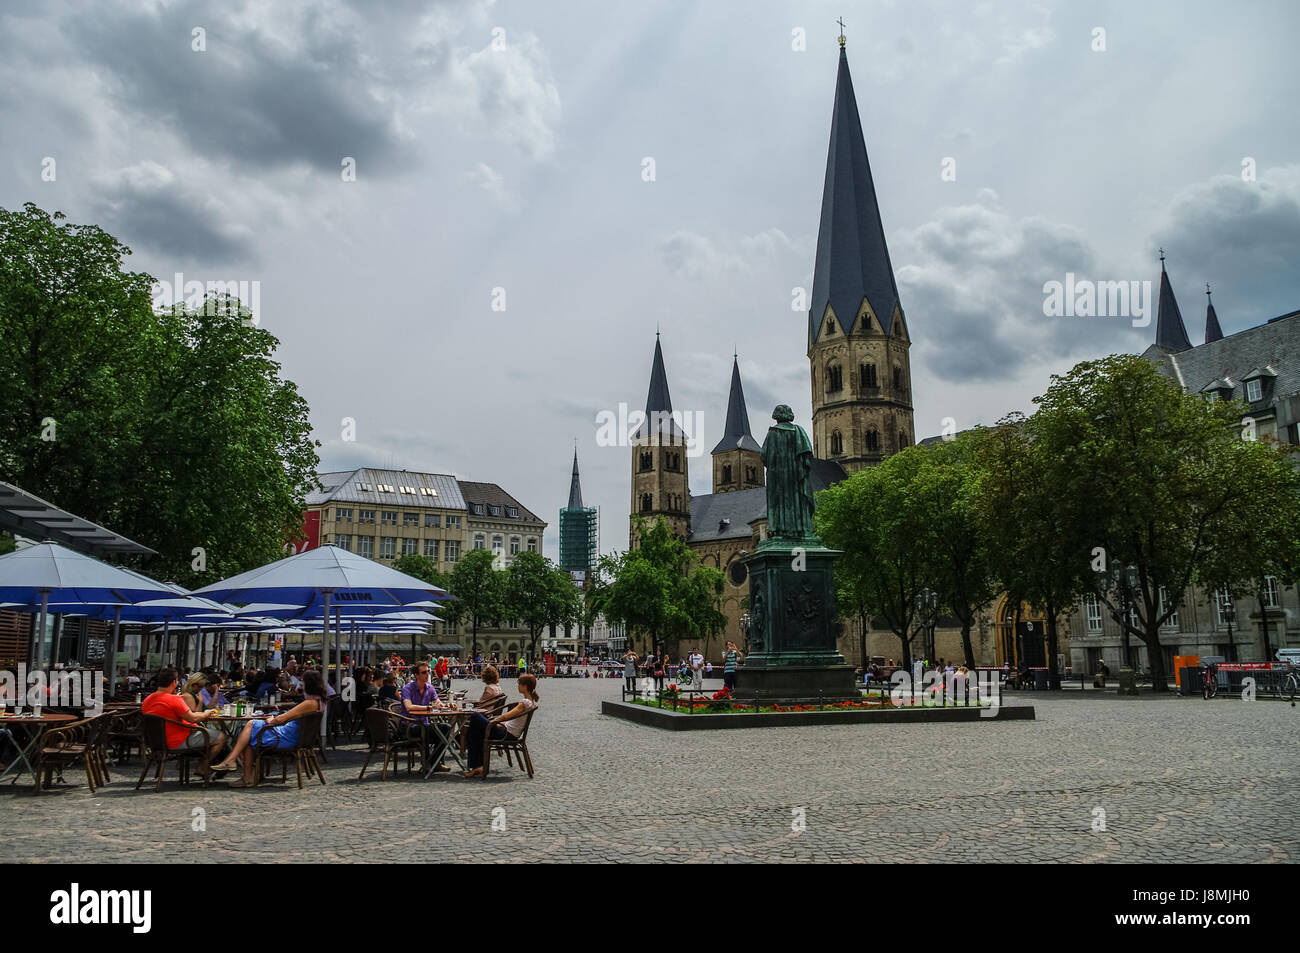 Bonn, Germany - July 10, 2011: Bonn market square with medieval church The Bonn Minster, statue of Beethoven and tourists in open cafe Stock Photo